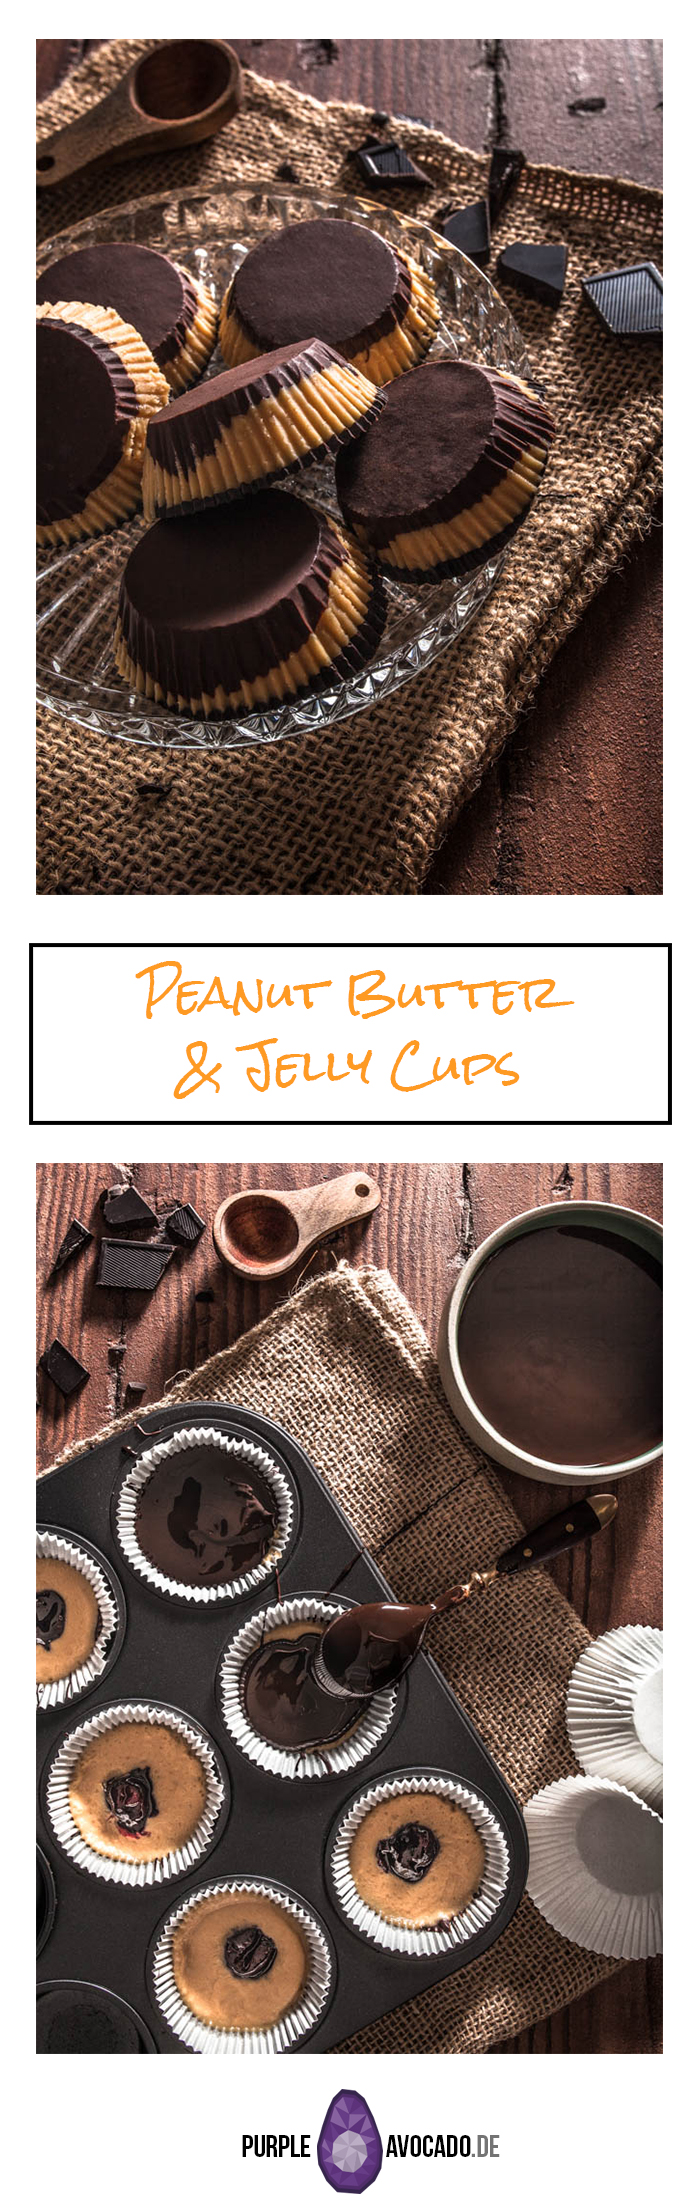 Recipe for Reese's inspired peanut butter jelly cups. Peanut butter, jam and dark chocolate in a parliné shape. 5 ingredients only and kind of healthy-ish and vegan. #dessert #sweet #no #valentines #recipe #vegan #healthy